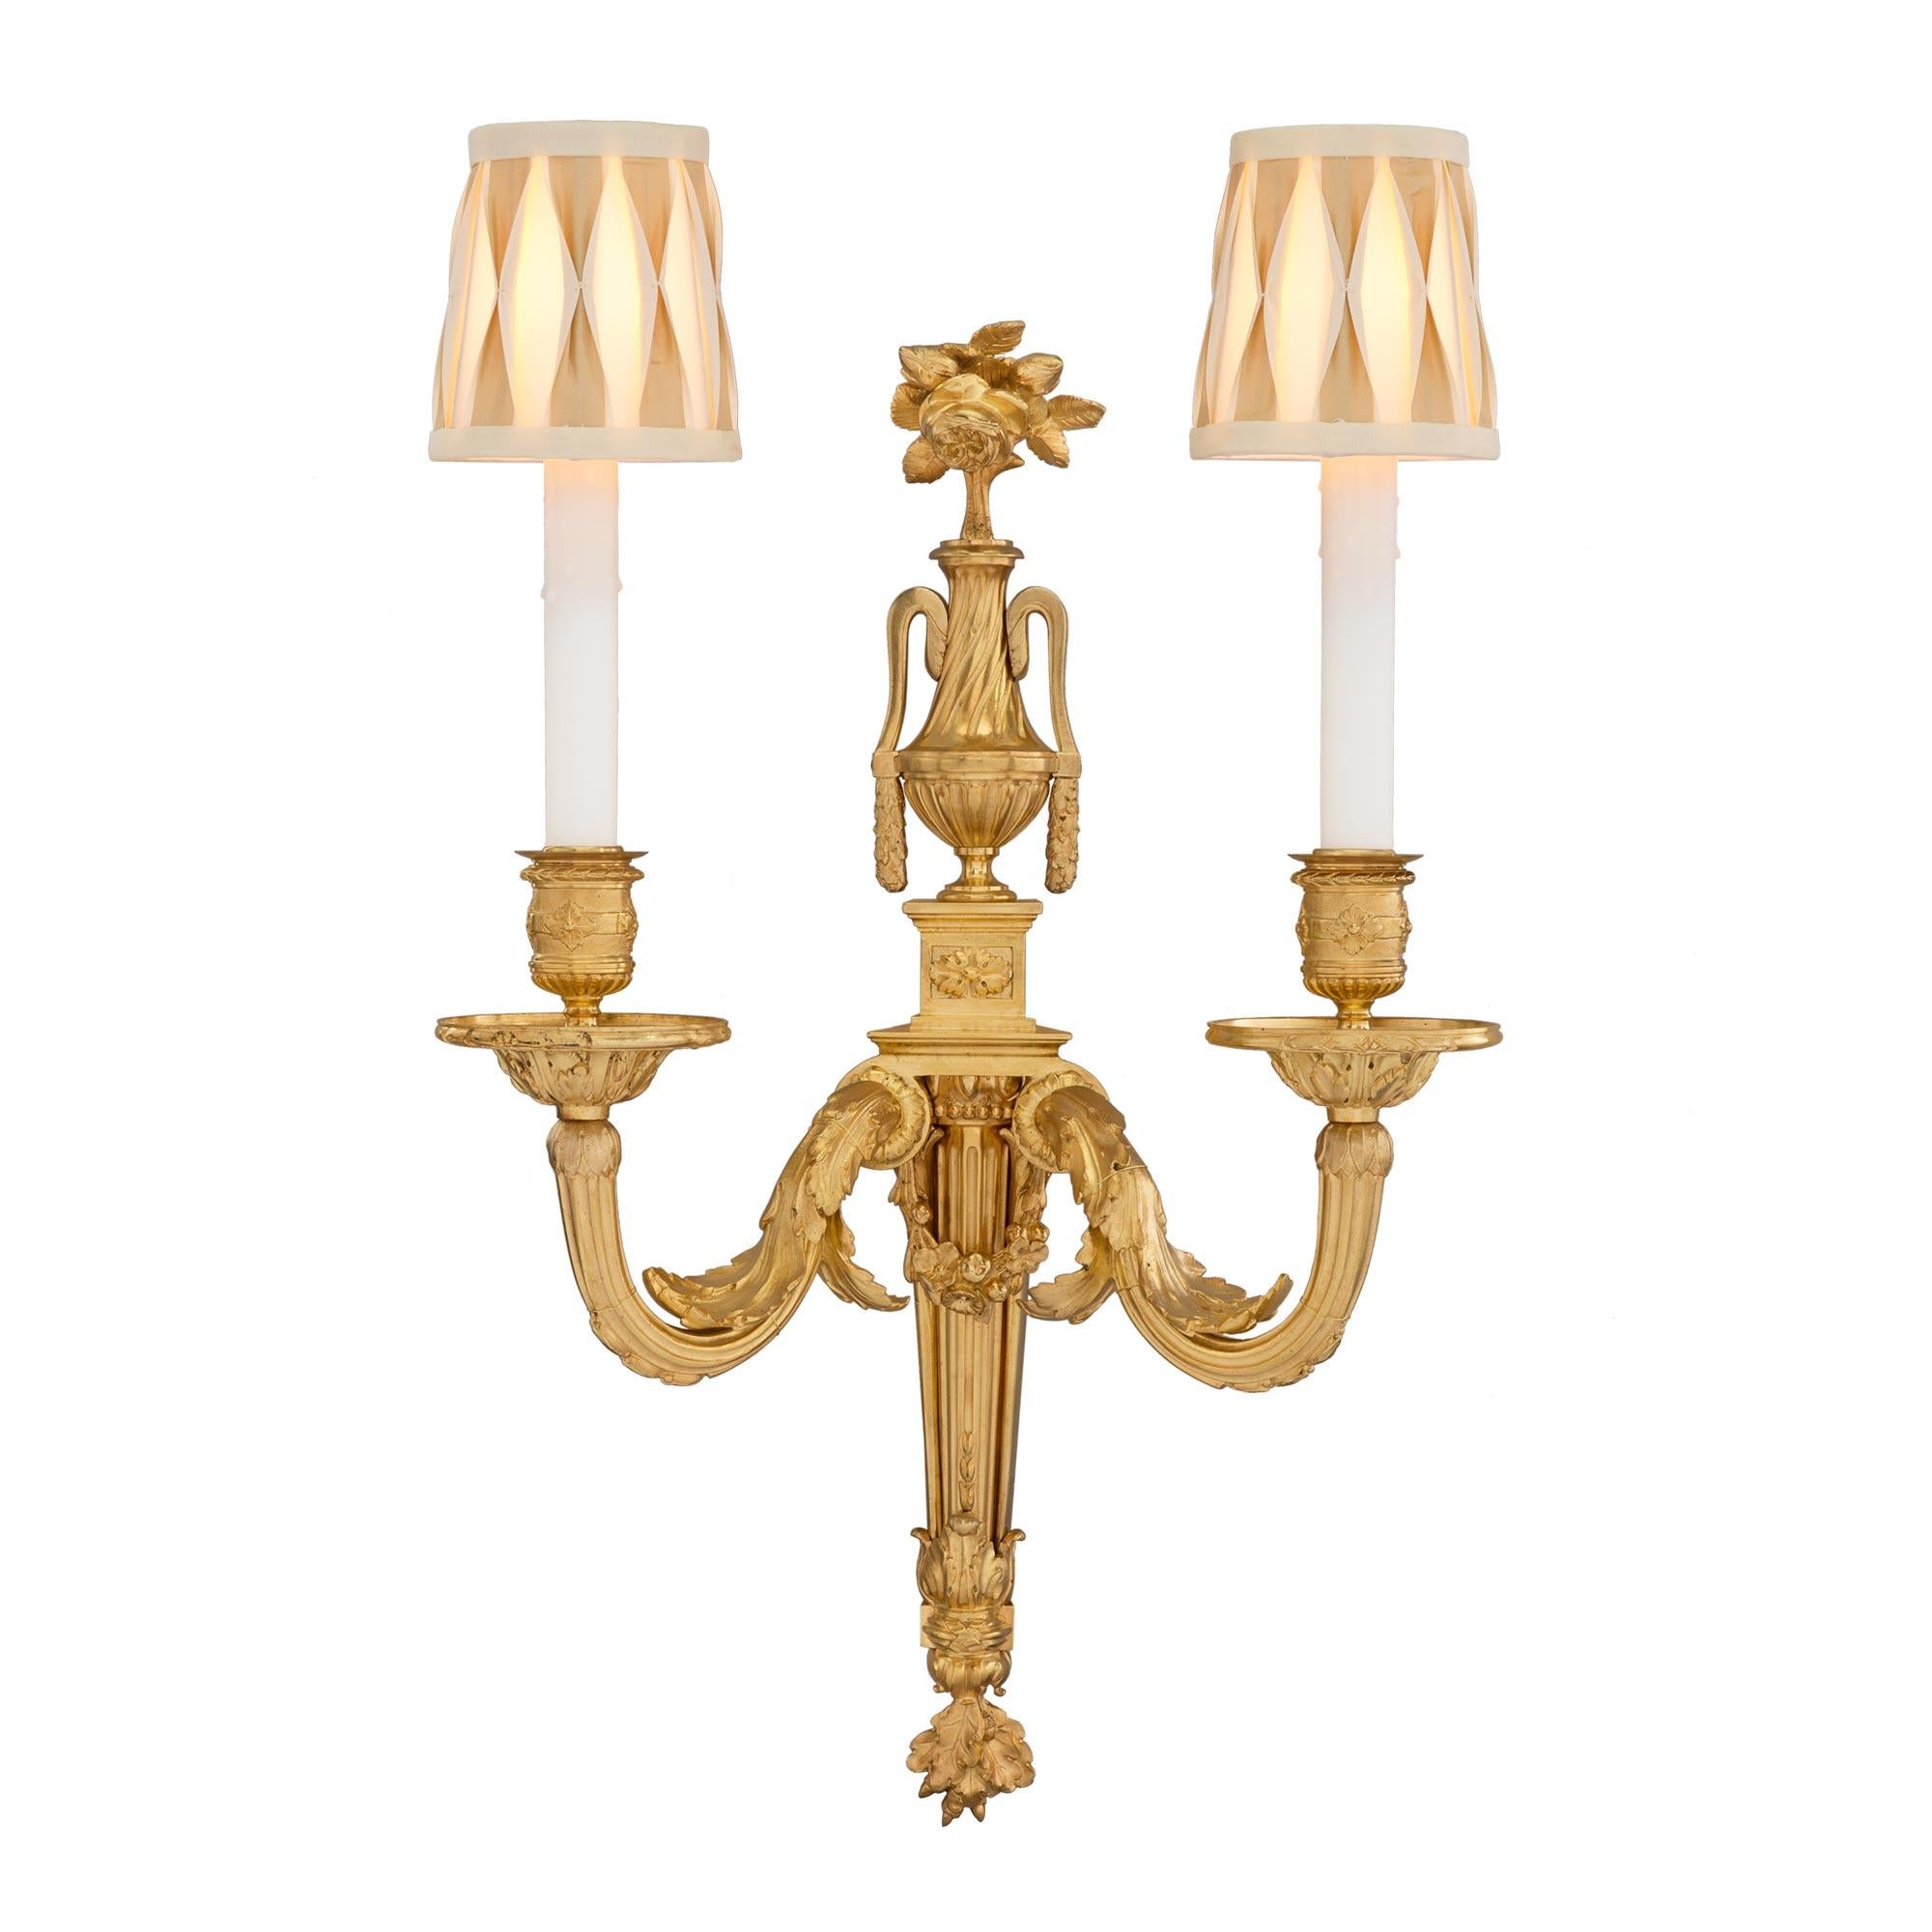 A handsome and statement making set of four French mid 19th century Louis XVI st. two arm ormolu sconces. The sconces top central urns of prosperity with blossoming flowers all on square supports with decorative rosettes. At the center of each